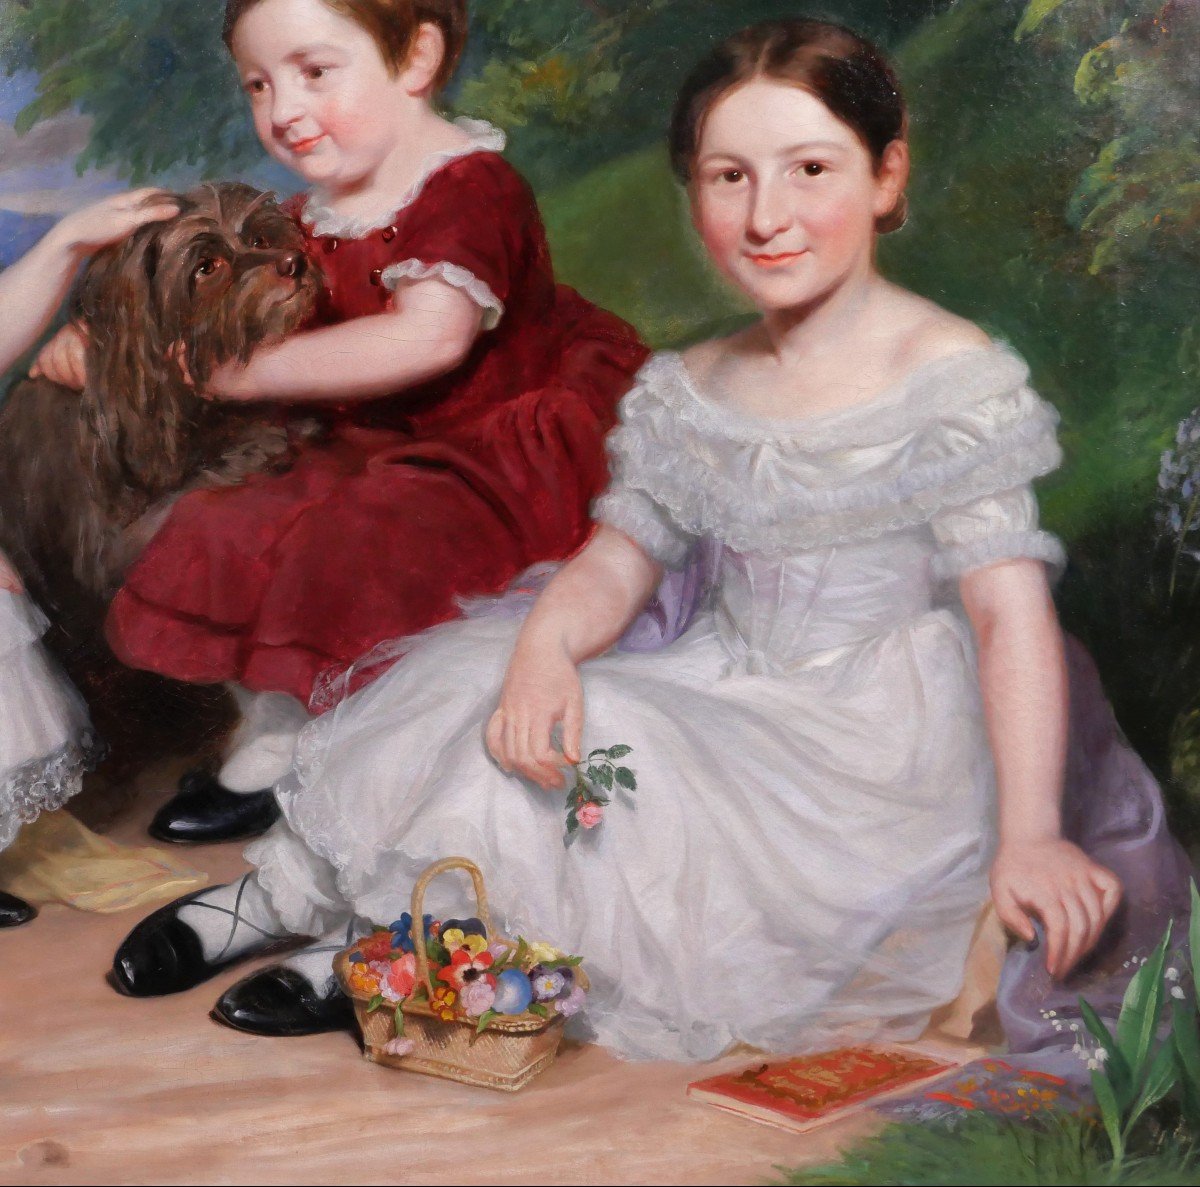 James Ramsay 1789-1854 Portraits Of Children And A Dog, Large Painting, 1844-photo-3